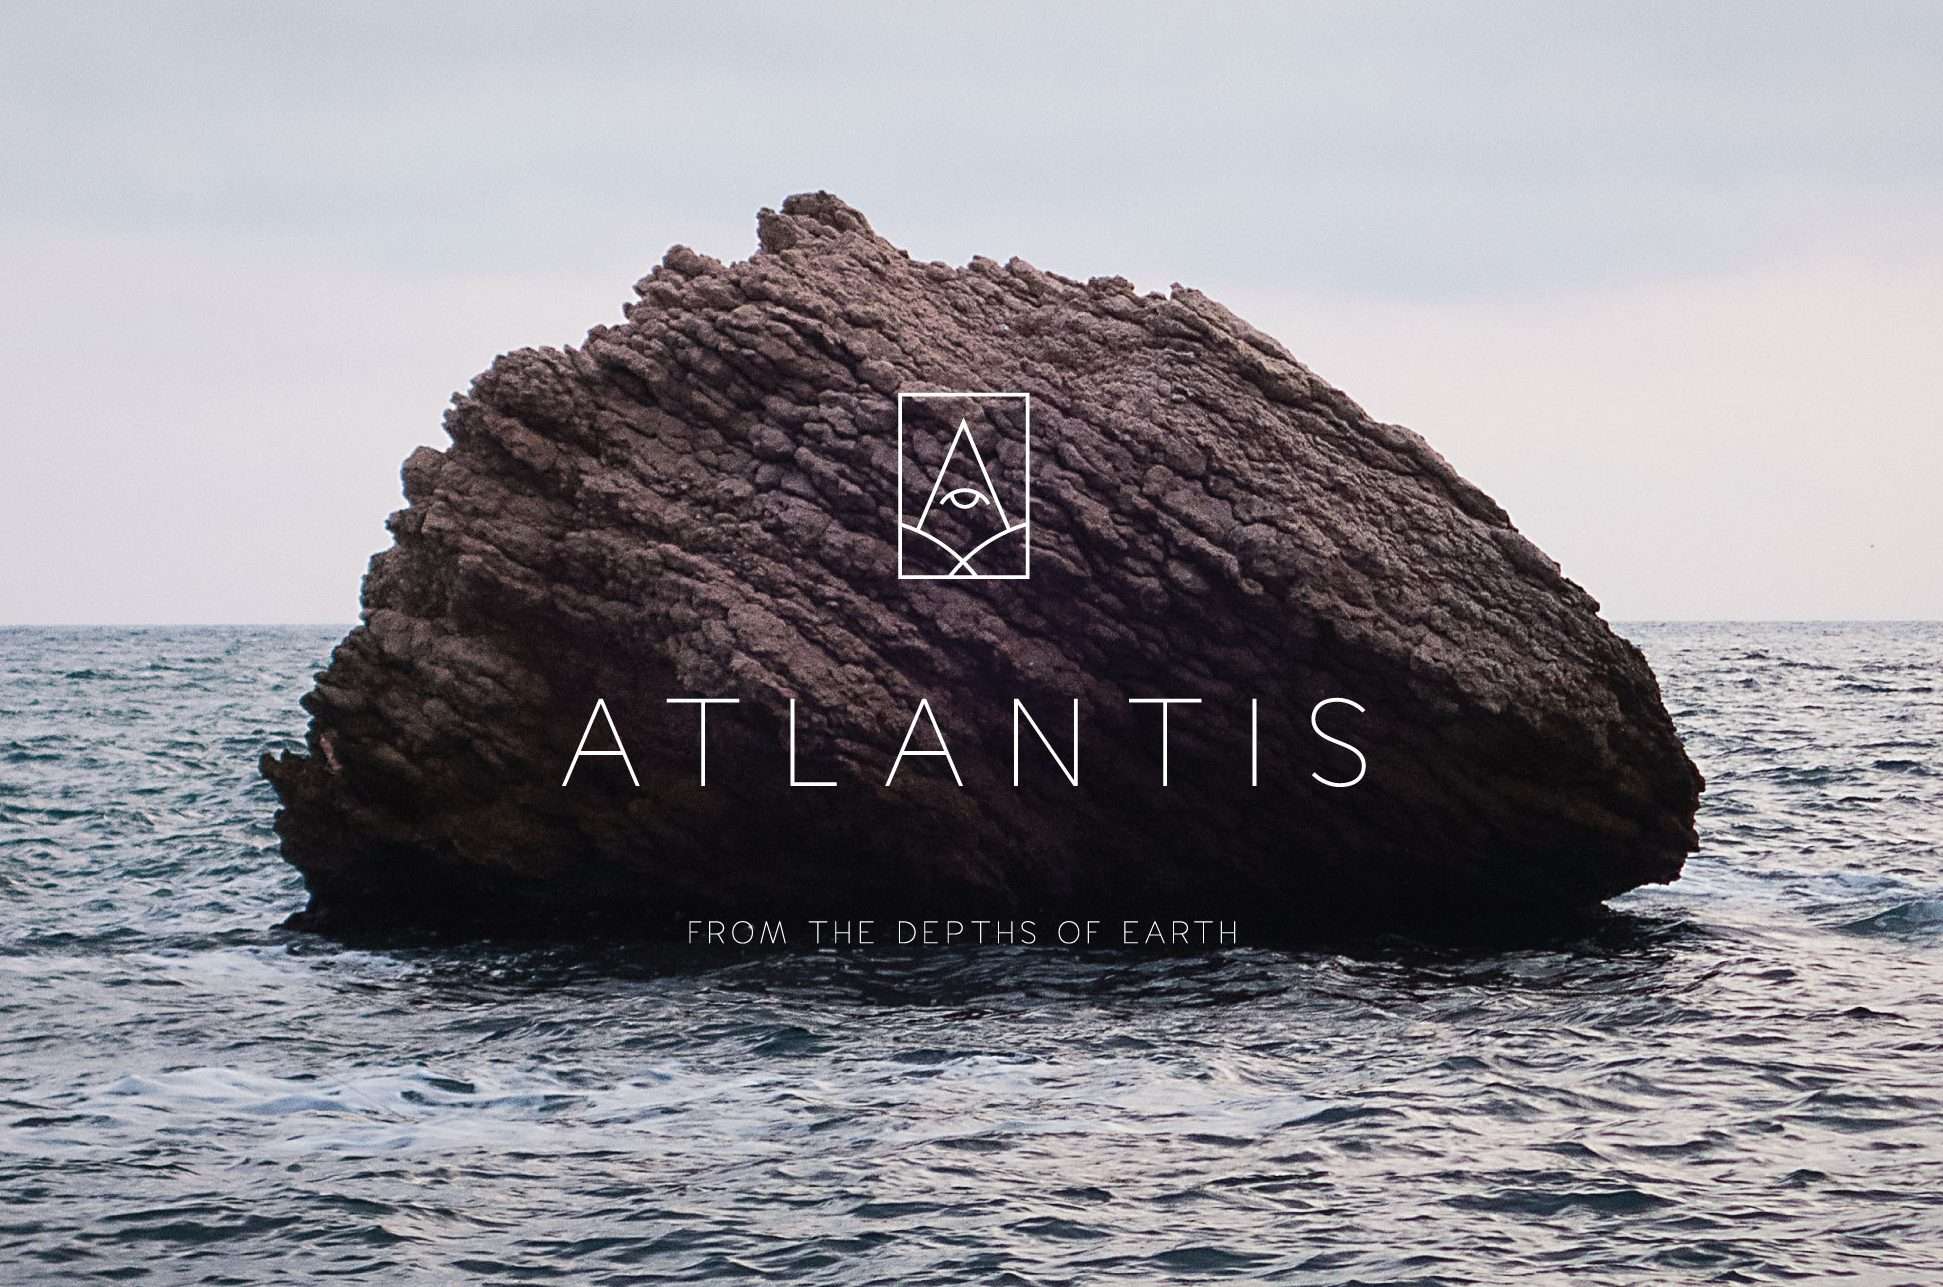 Logo design for Atlantis. The logo is superimposed over an image of a rock jutting out of the sea.